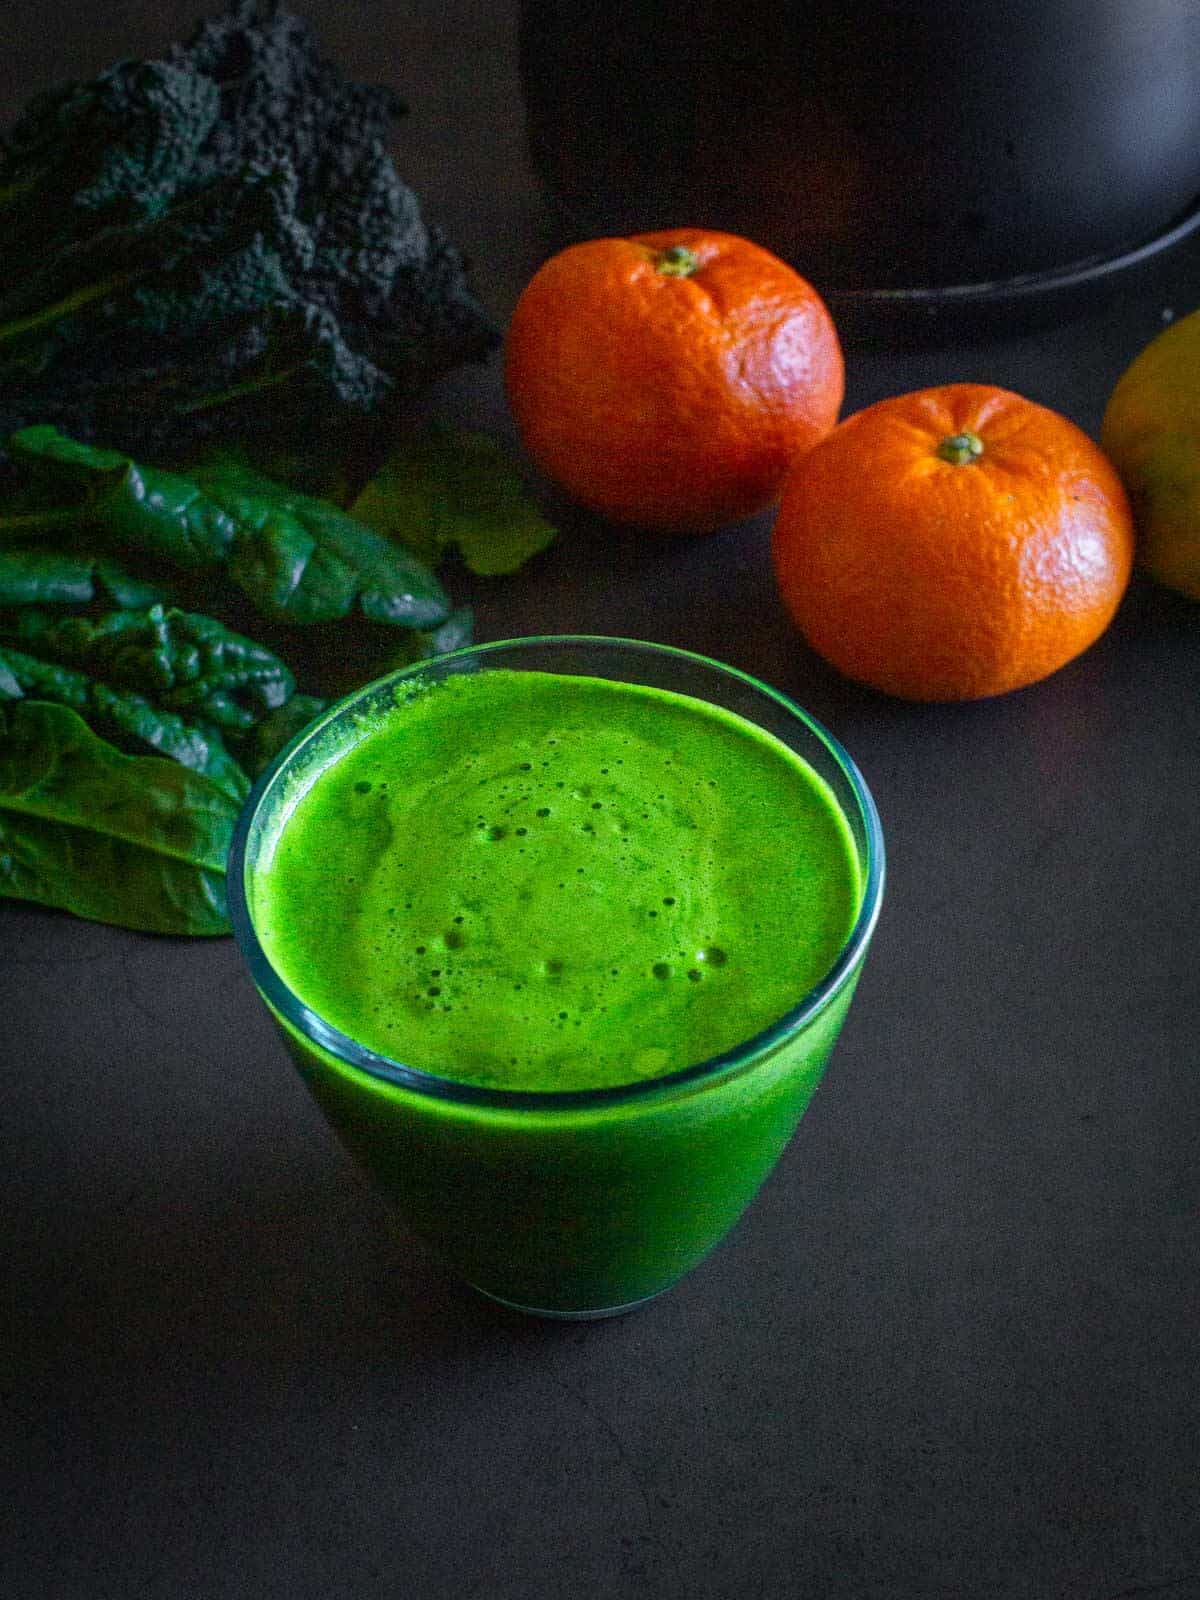 glass served with kale and spinach juice.